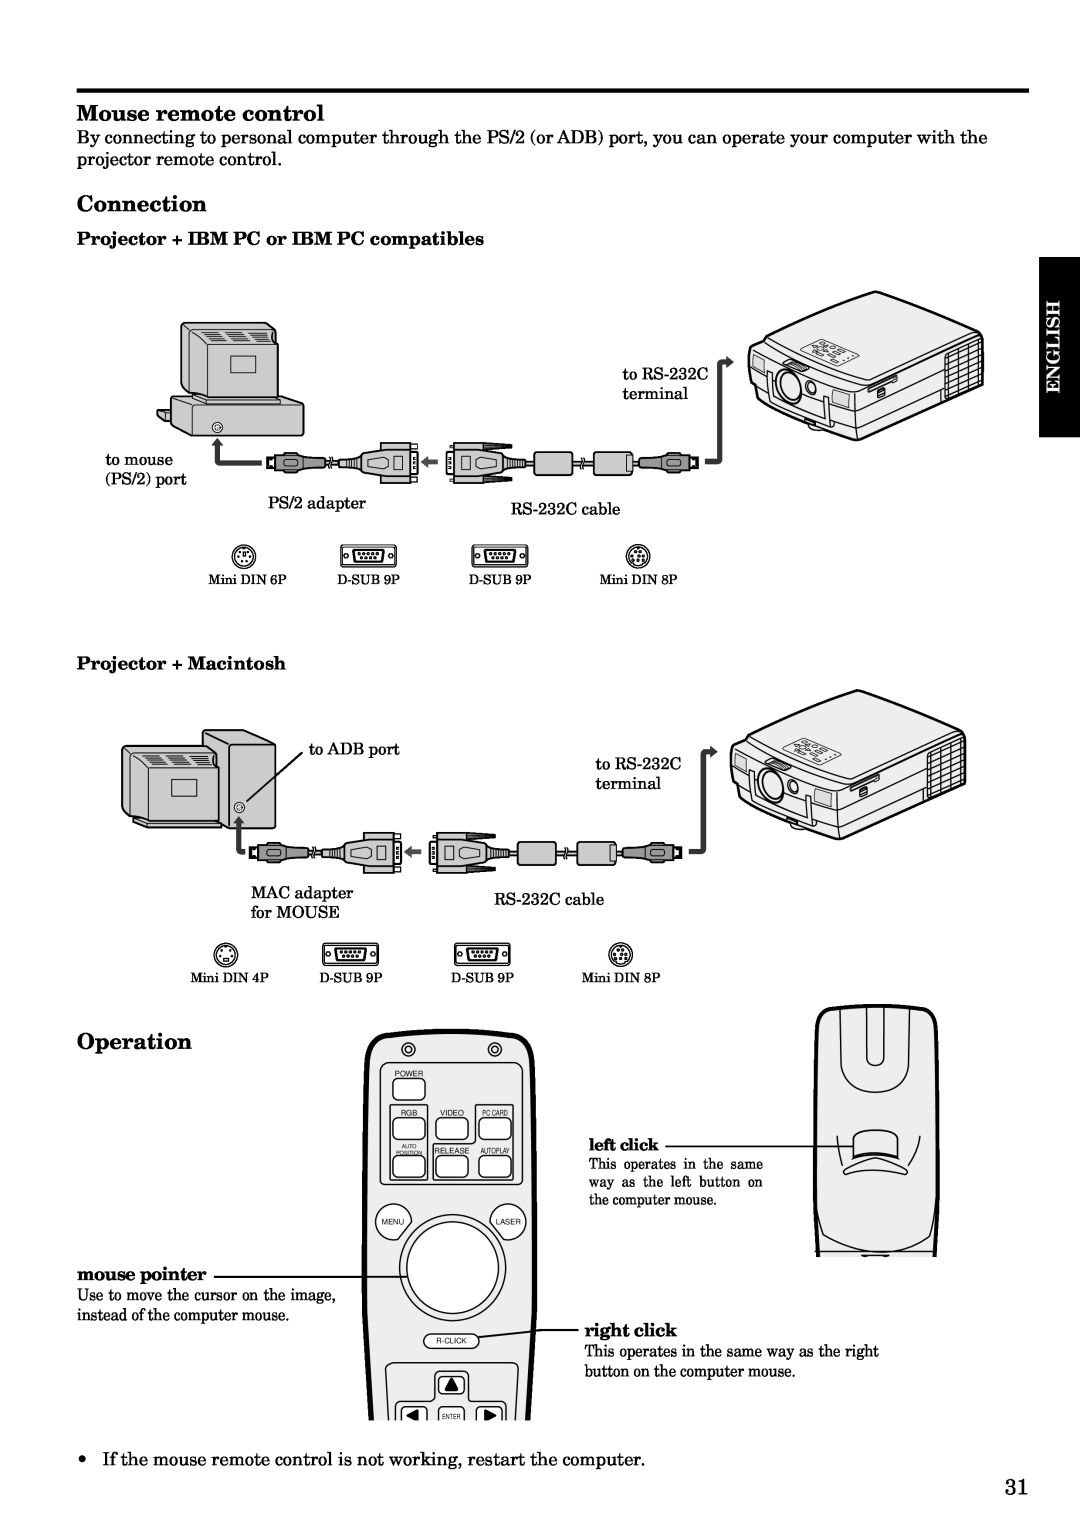 Mitsubishi Electronics LVP-X120A Mouse remote control, Connection, Operation, Projector + IBM PC or IBM PC compatibles 